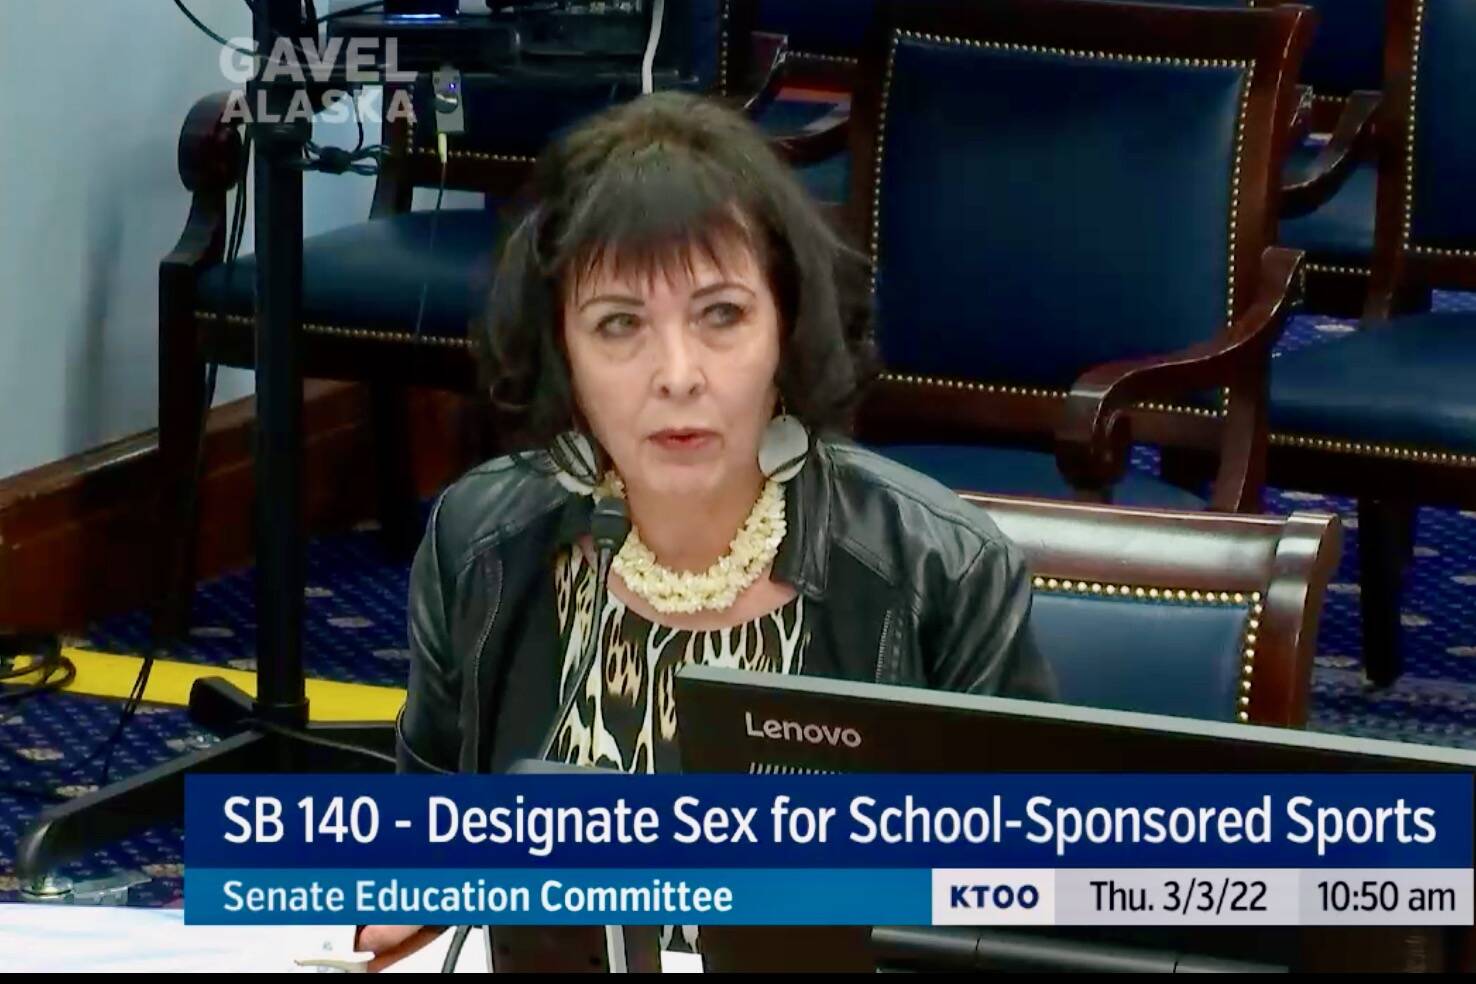 Screenshot
In this screenshot of Gavel Alaska, Sen. Shelley Hughes, R-Palmer, spoke to the Senate Education Committee on Thursday, March 3, 2022, regarding a bill that would prevent transgender athletes from competing as the sex they identify with.